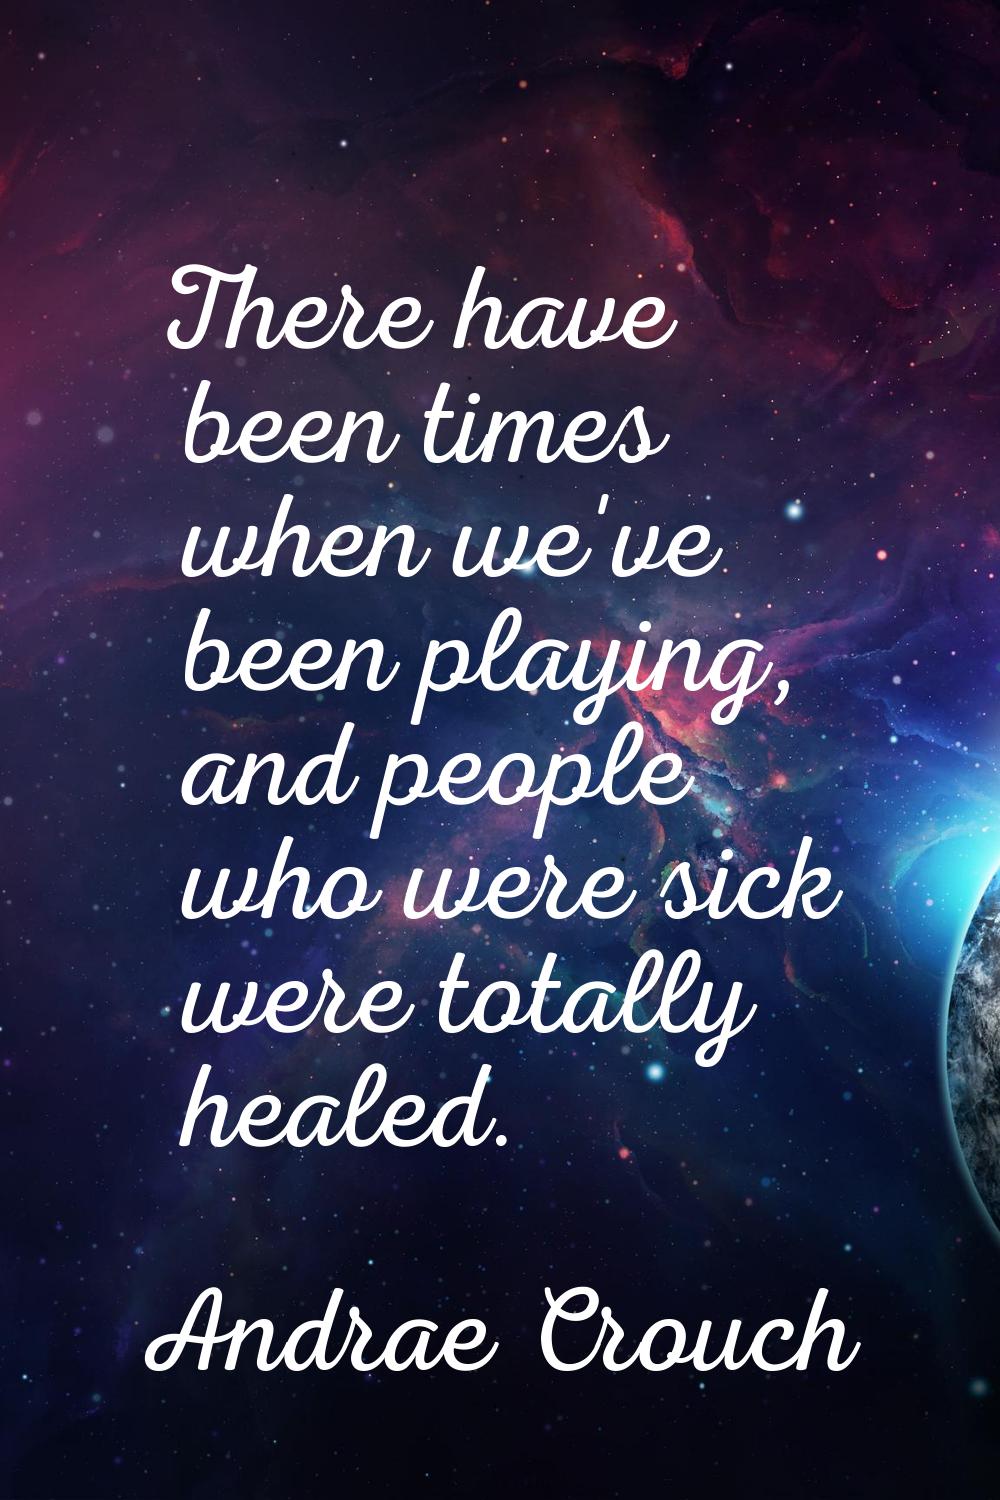 There have been times when we've been playing, and people who were sick were totally healed.